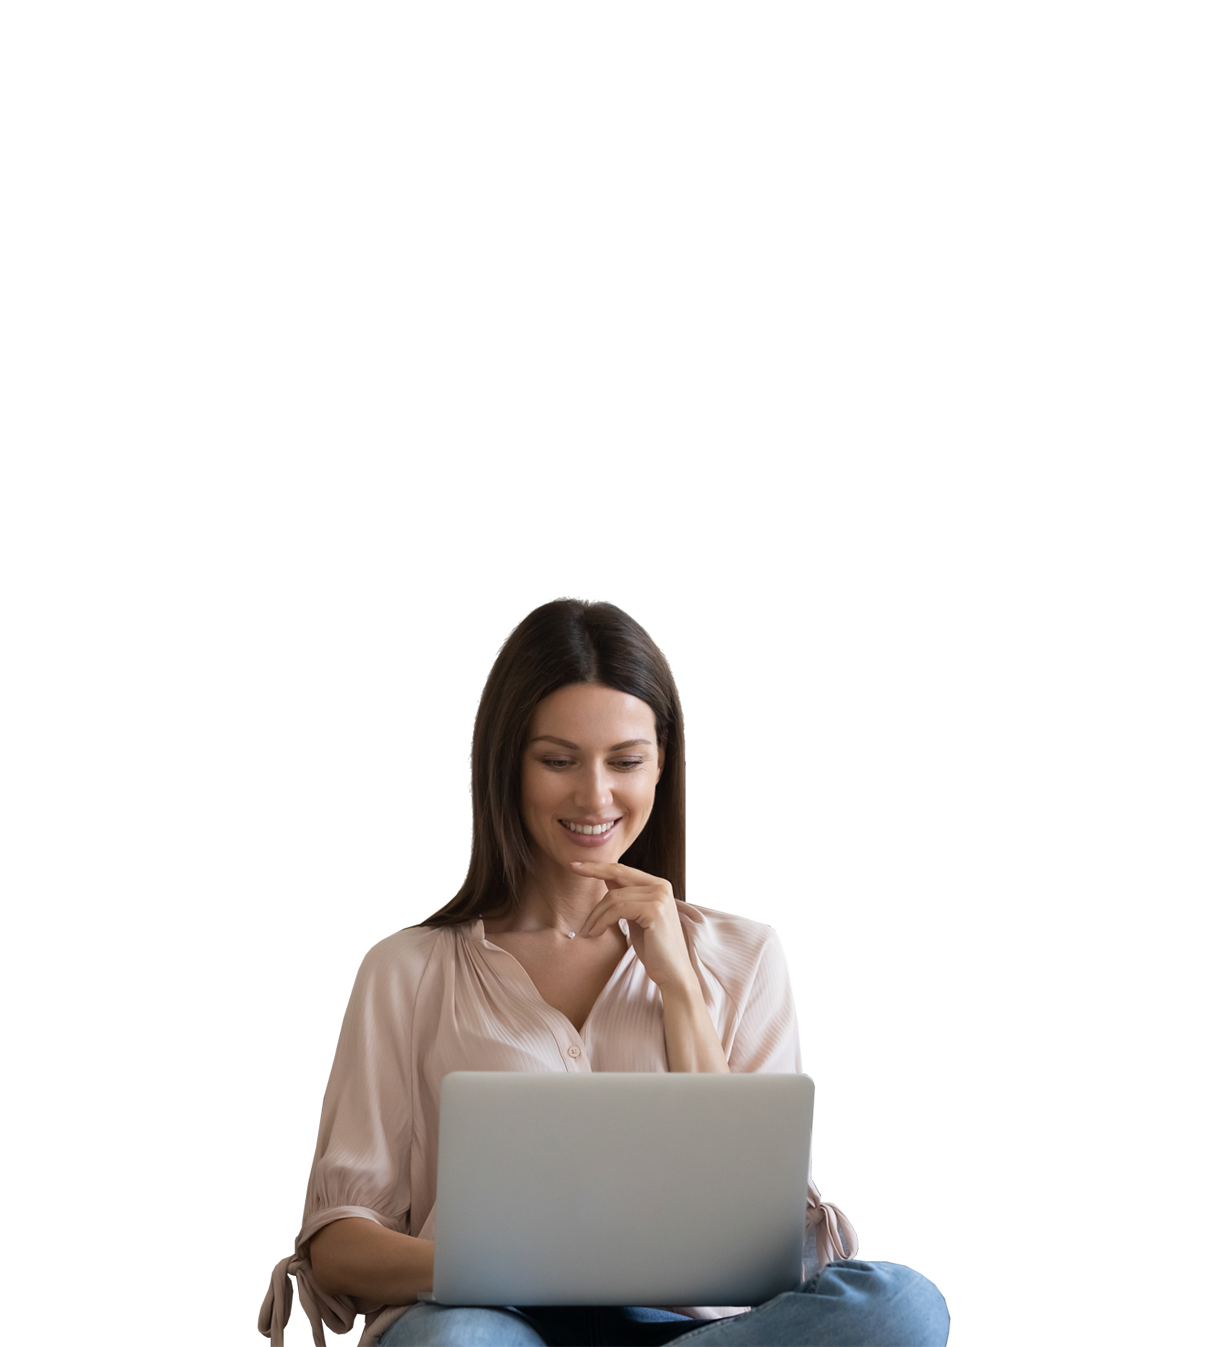 Woman on Laptop v6.png 1